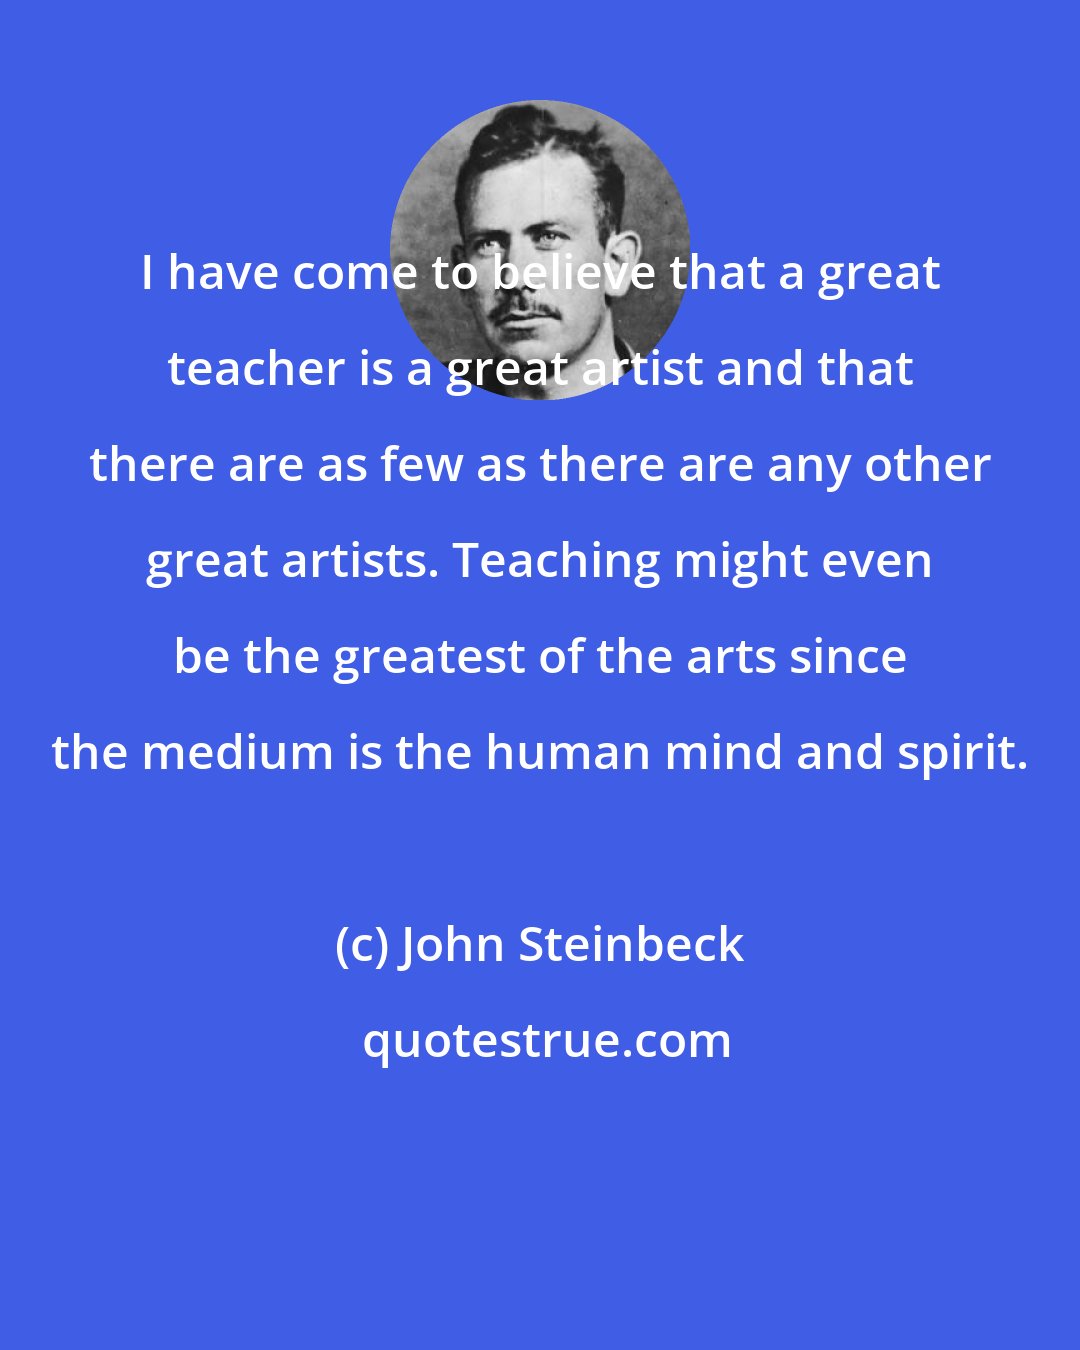 John Steinbeck: I have come to believe that a great teacher is a great artist and that there are as few as there are any other great artists. Teaching might even be the greatest of the arts since the medium is the human mind and spirit.